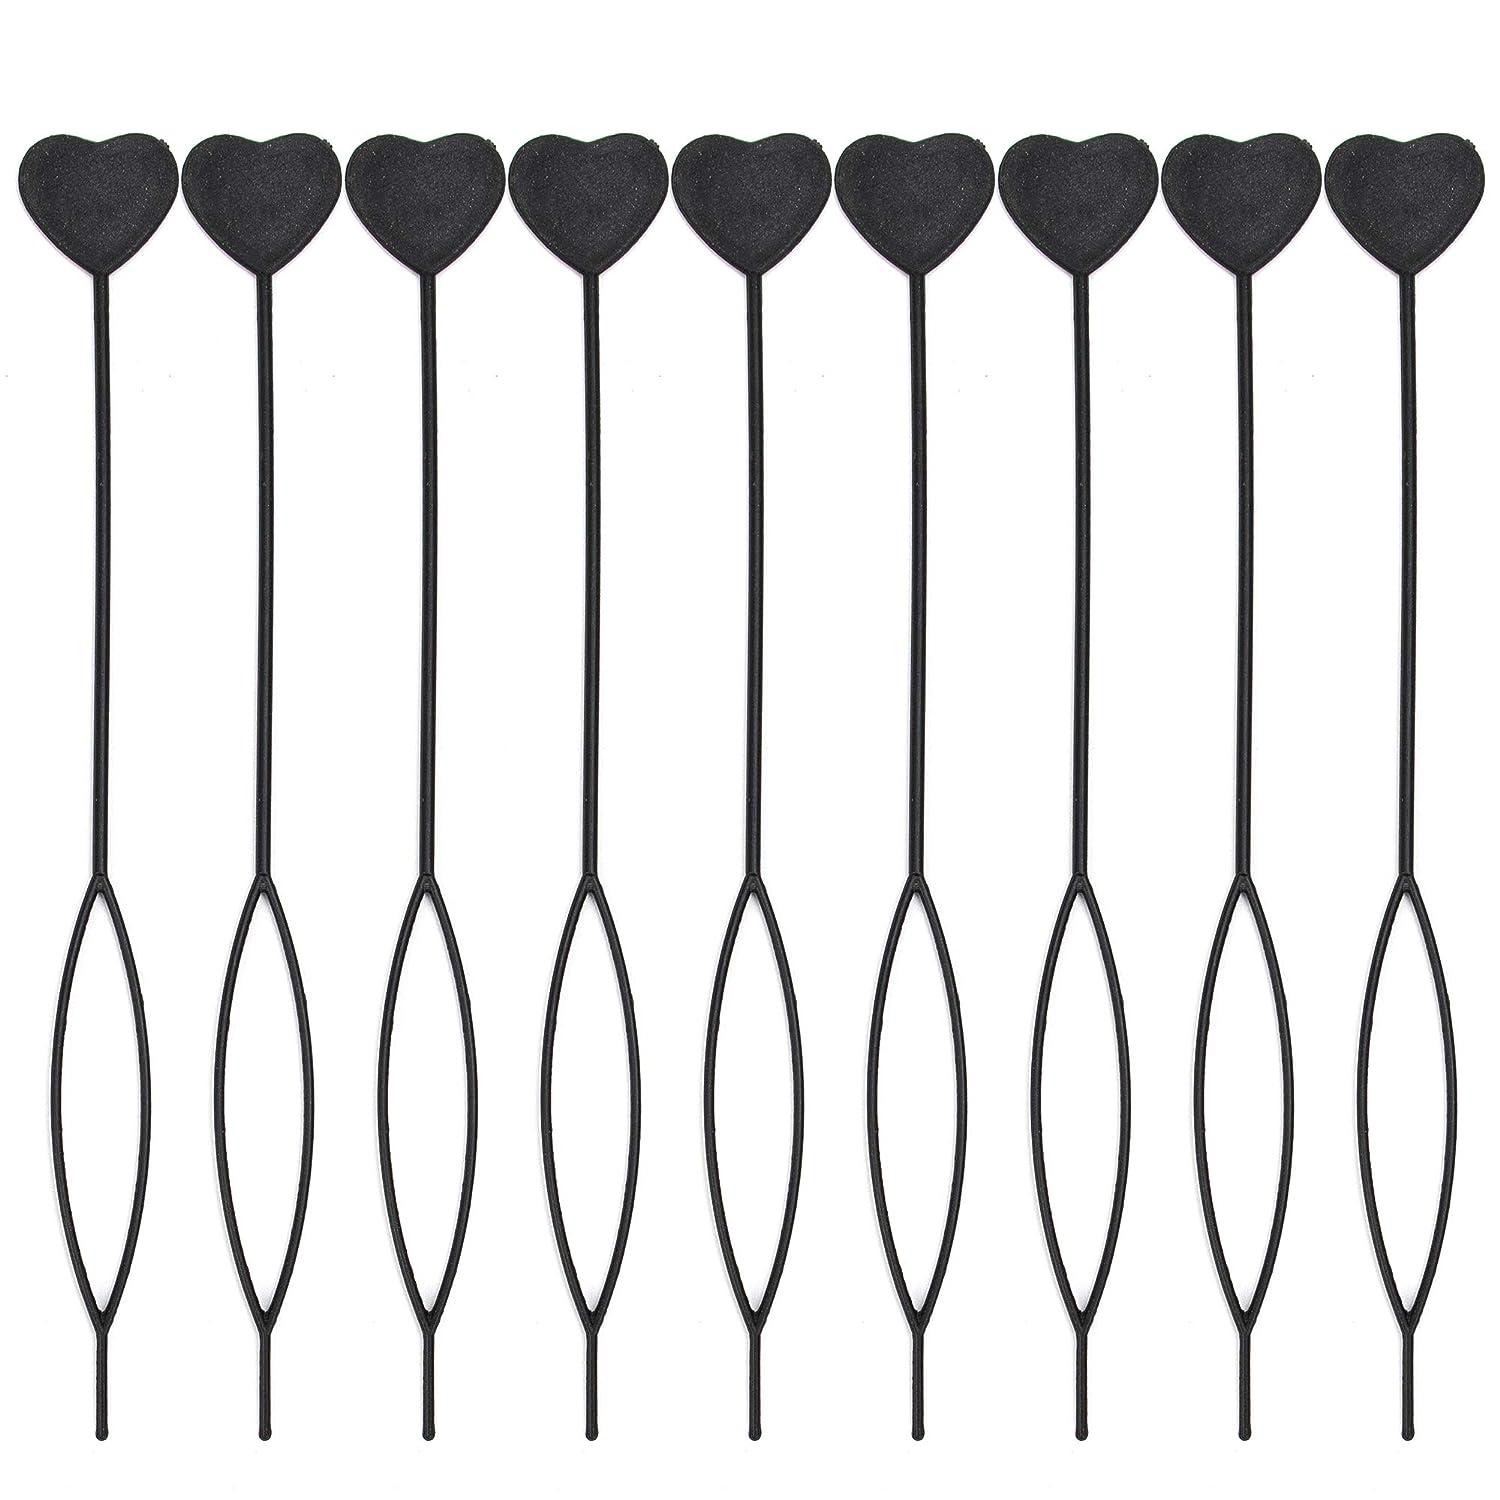 AUEAR Pull Hair Pin Quick Beader for Loading Beads on Hair Automatic Hair  Beader and Styling Kit Ponytail Maker Styling Tooll (16 Pack Black Color)  16 Count (Pack of 1) Black